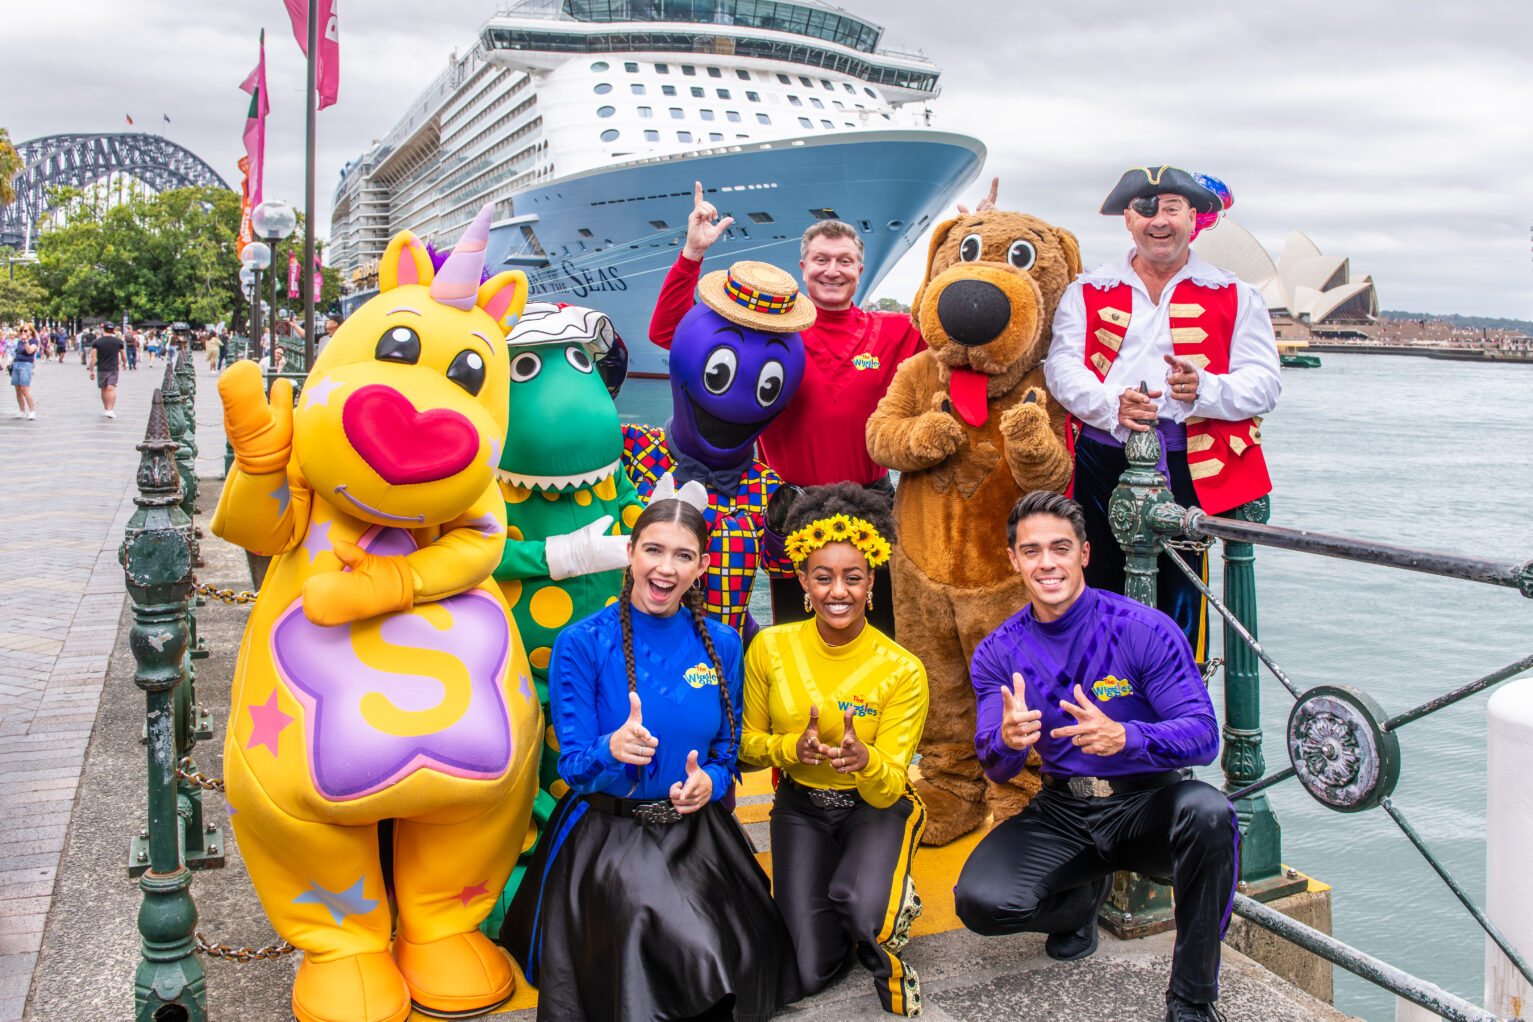 The Wiggles in front of Ovation Of The Seas